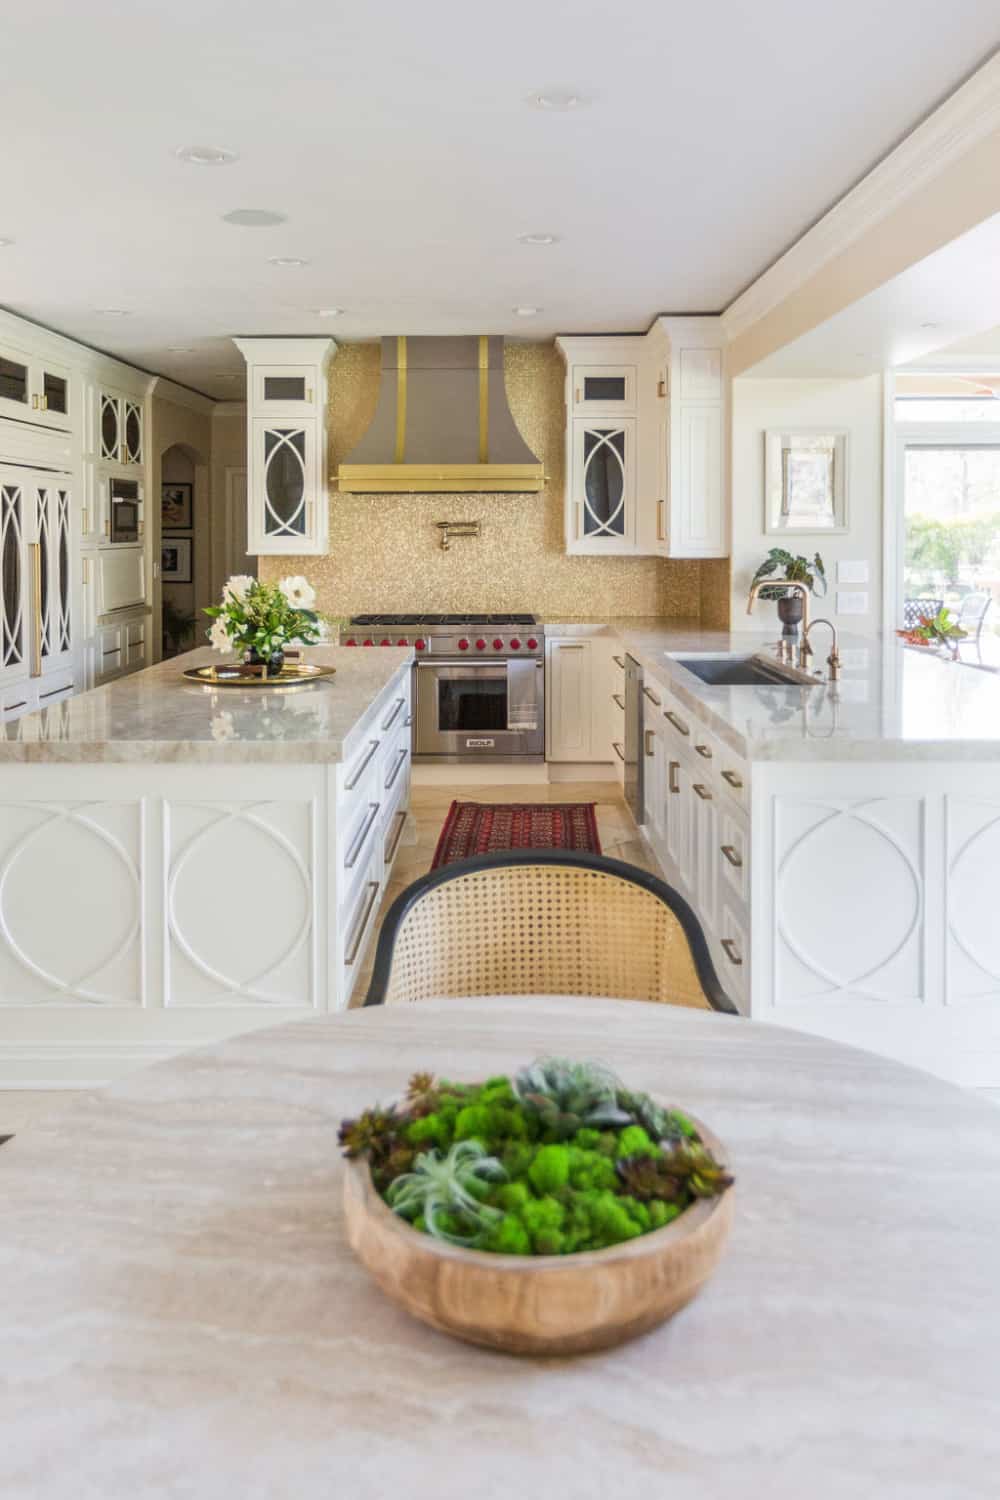 Nicholas Design Build | A large kitchen with white cabinets and marble counter tops undergoing a remodel.